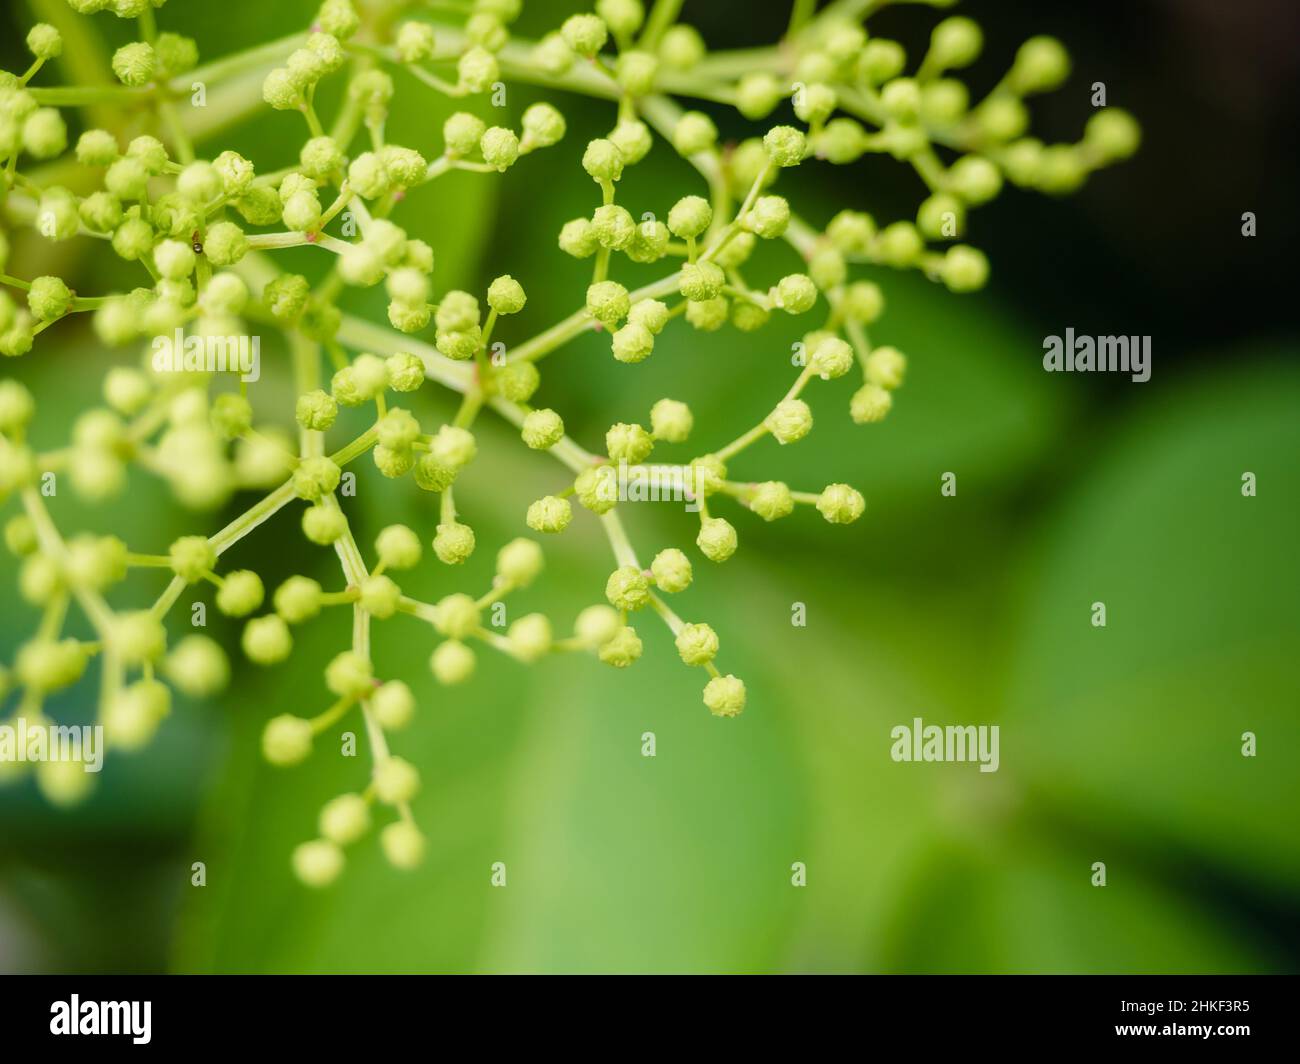 Immature green flower elder or elderberry, focus on foreground and green plant on a background Stock Photo